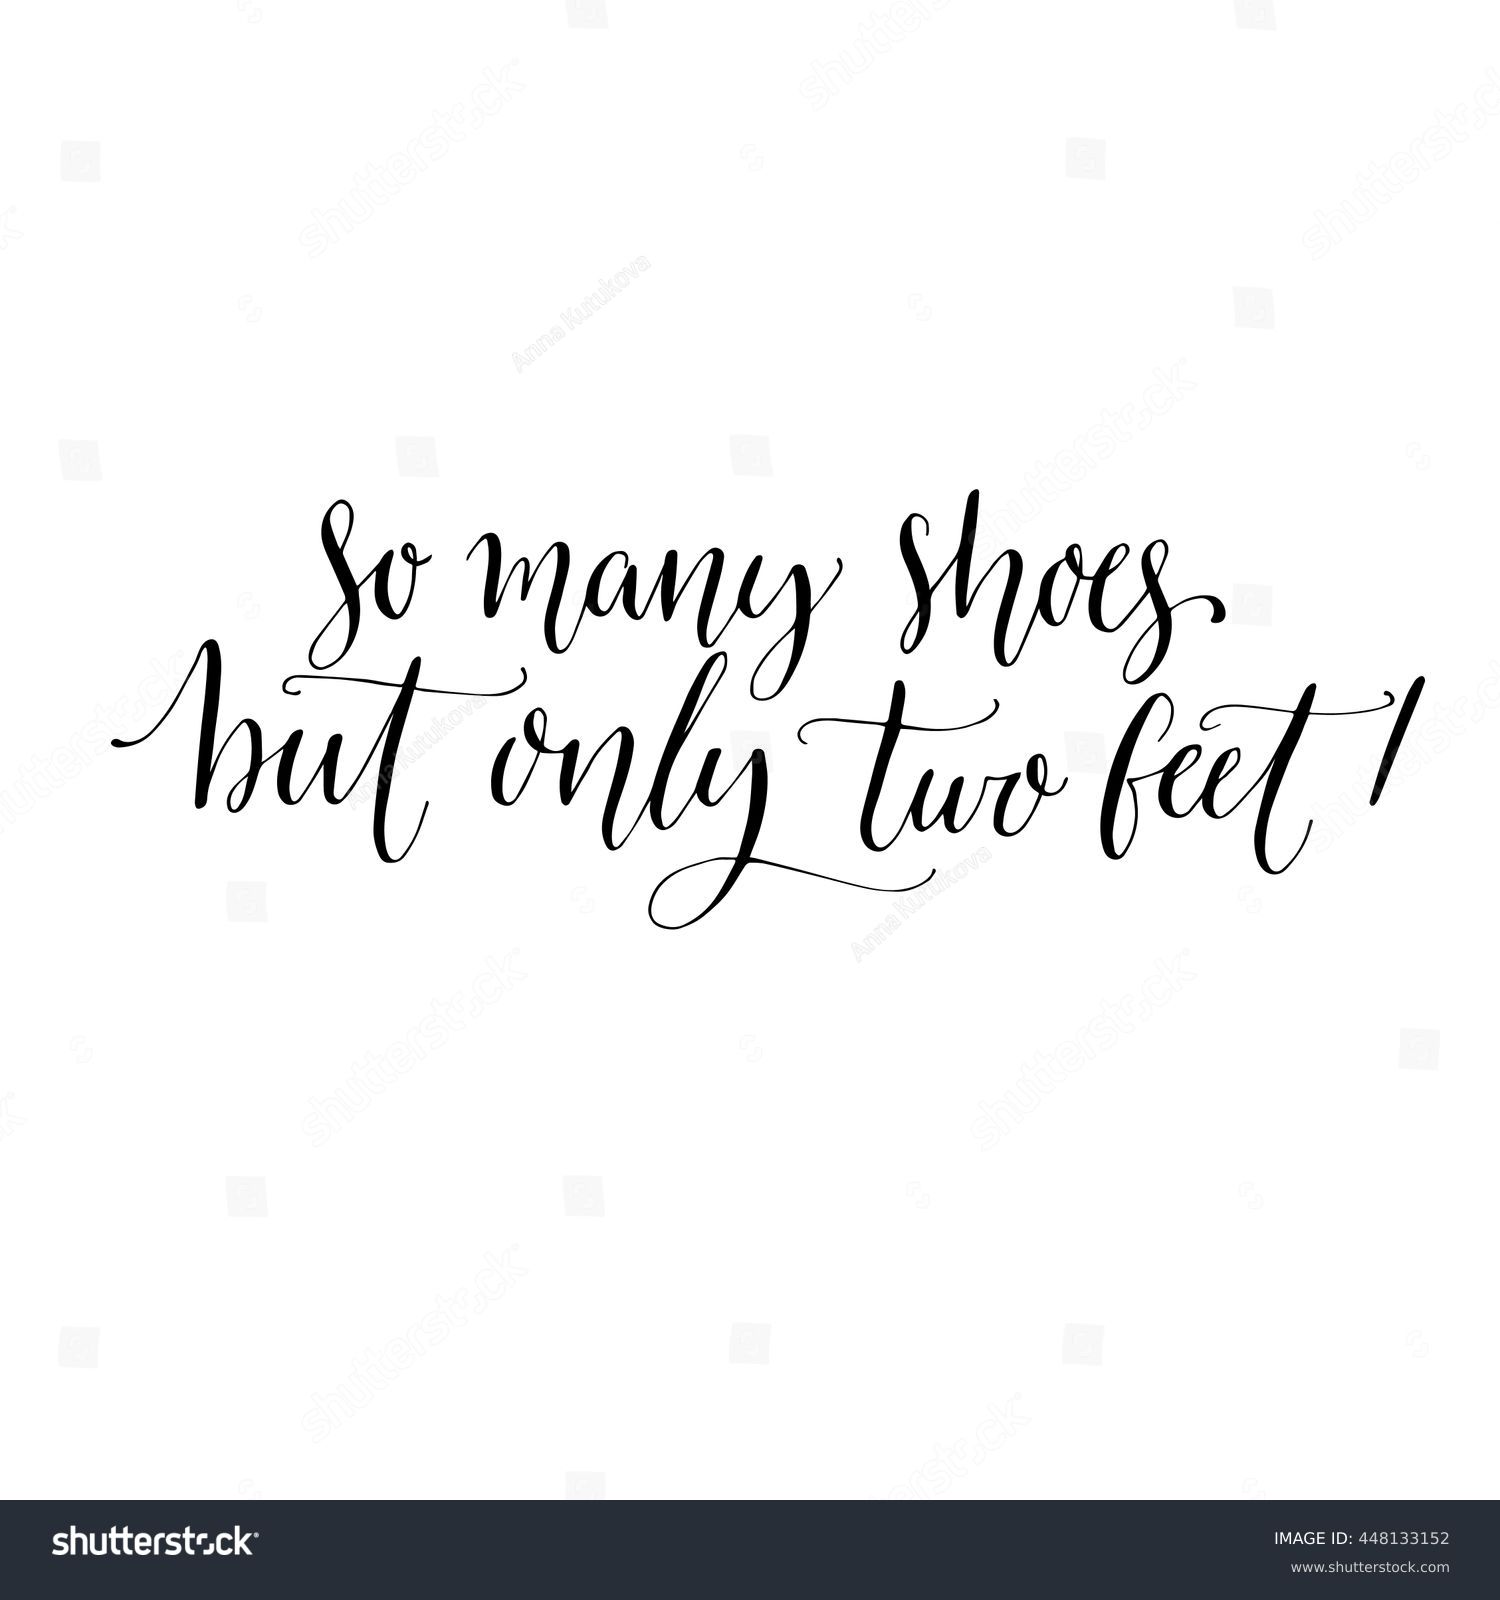 only two feet shoes